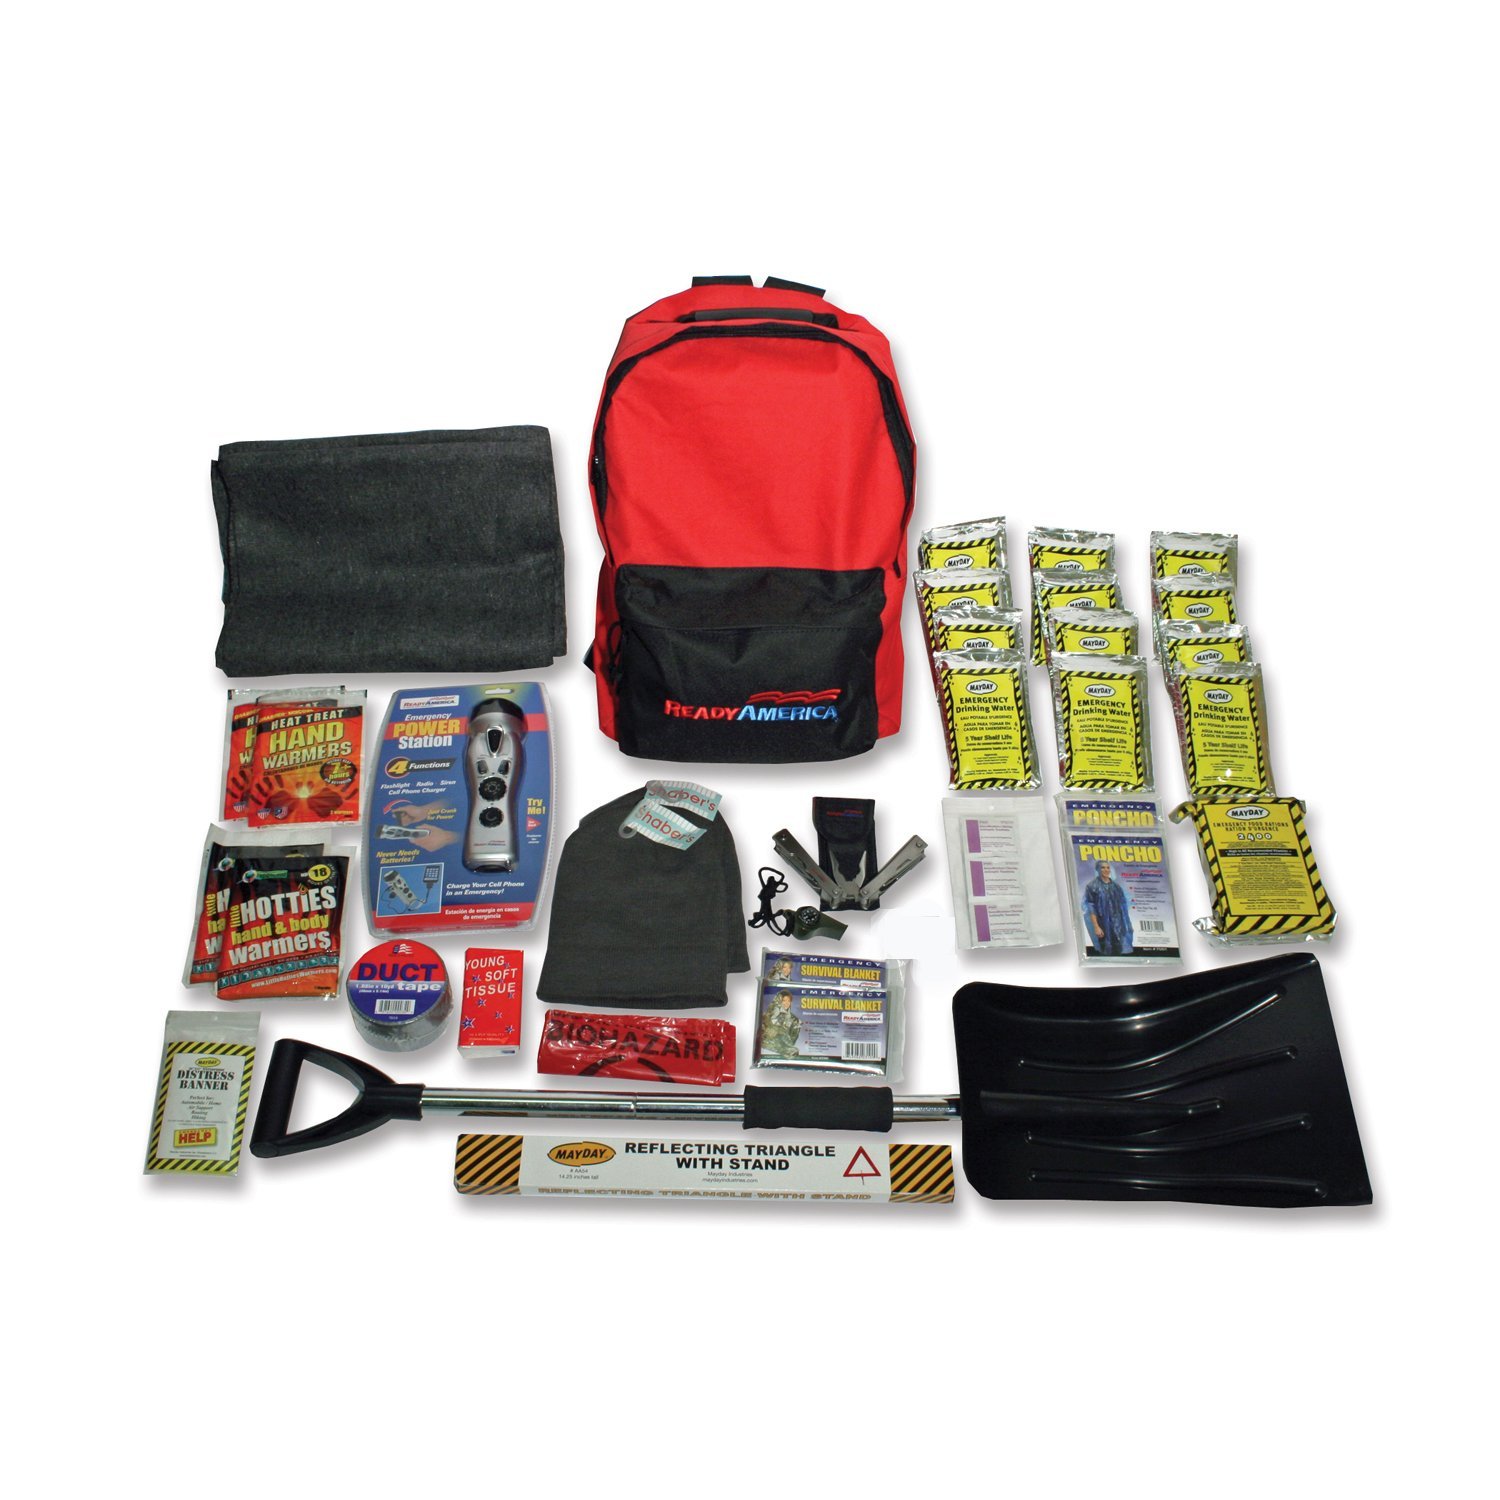 Ready America 2person Cold Weather Survival Kit-3 Day Pack - 70410